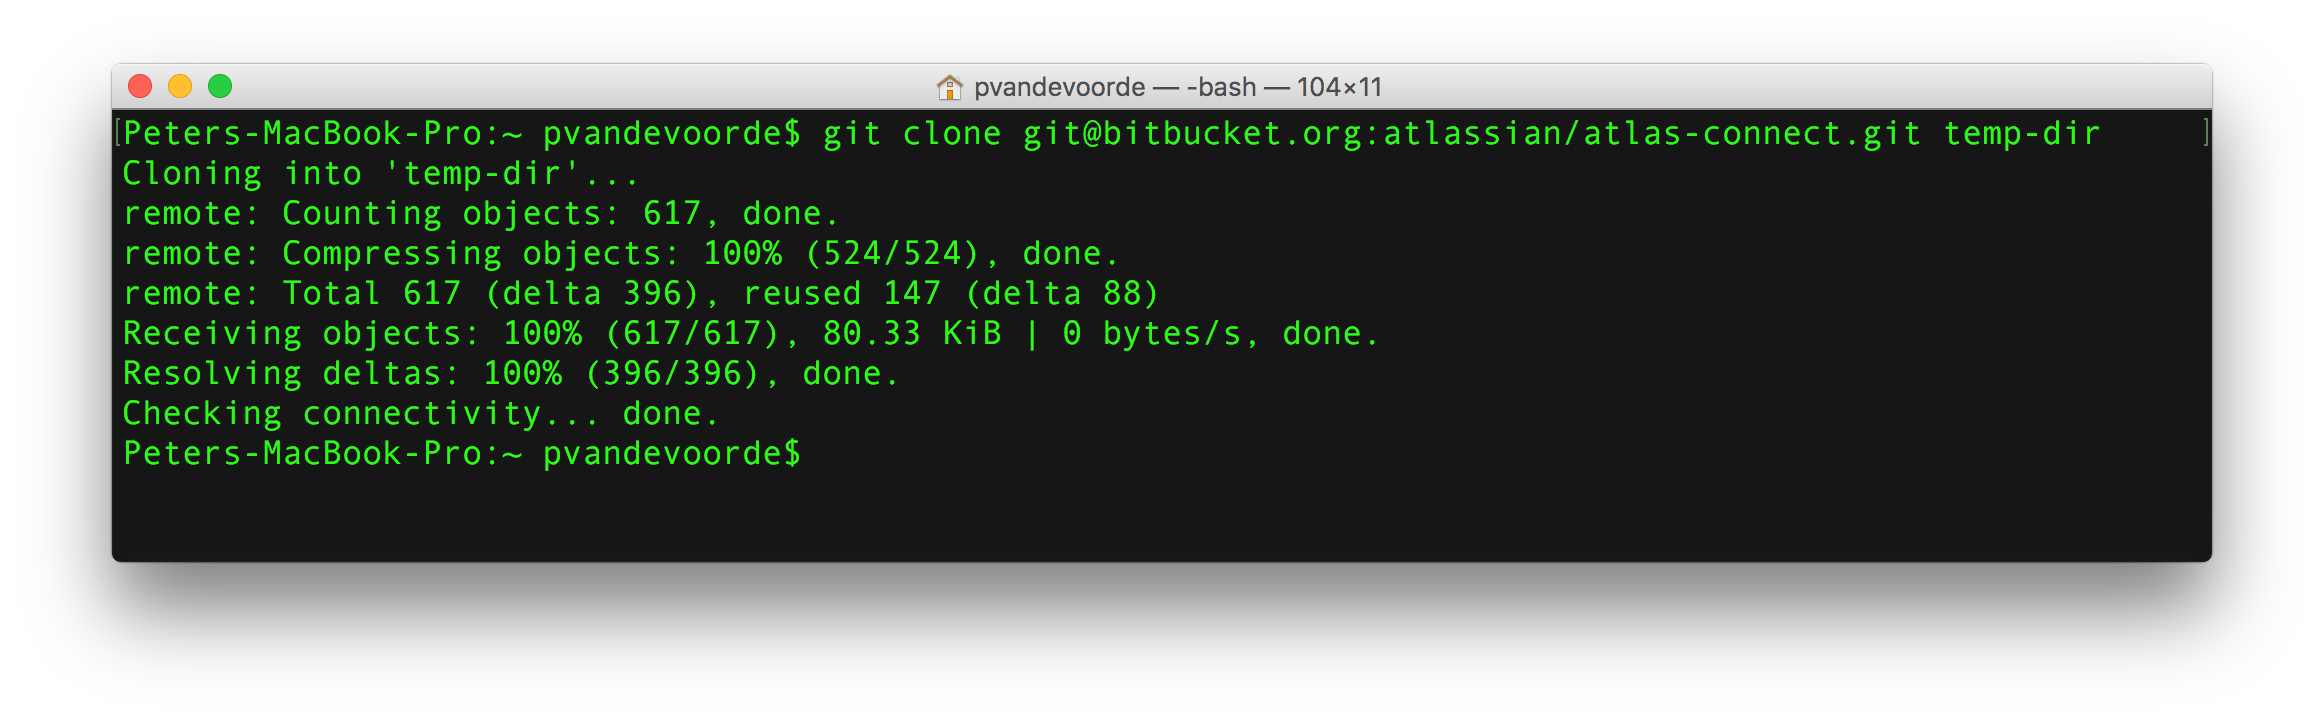 cannot see git clone command in gerrit